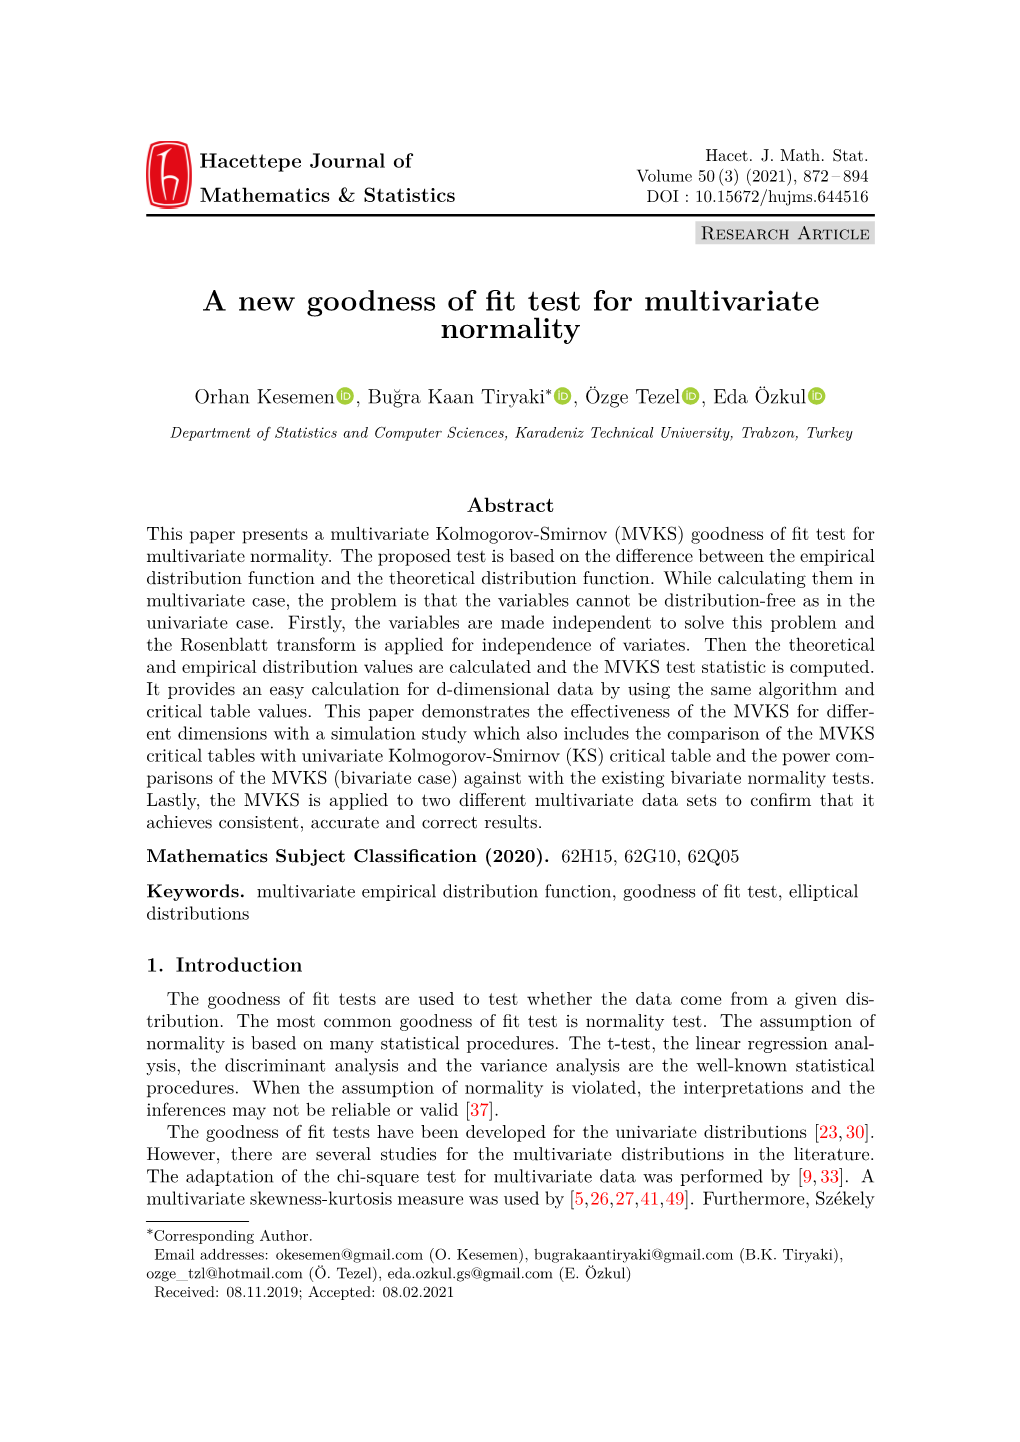 A New Goodness of Fit Test for Multivariate Normality